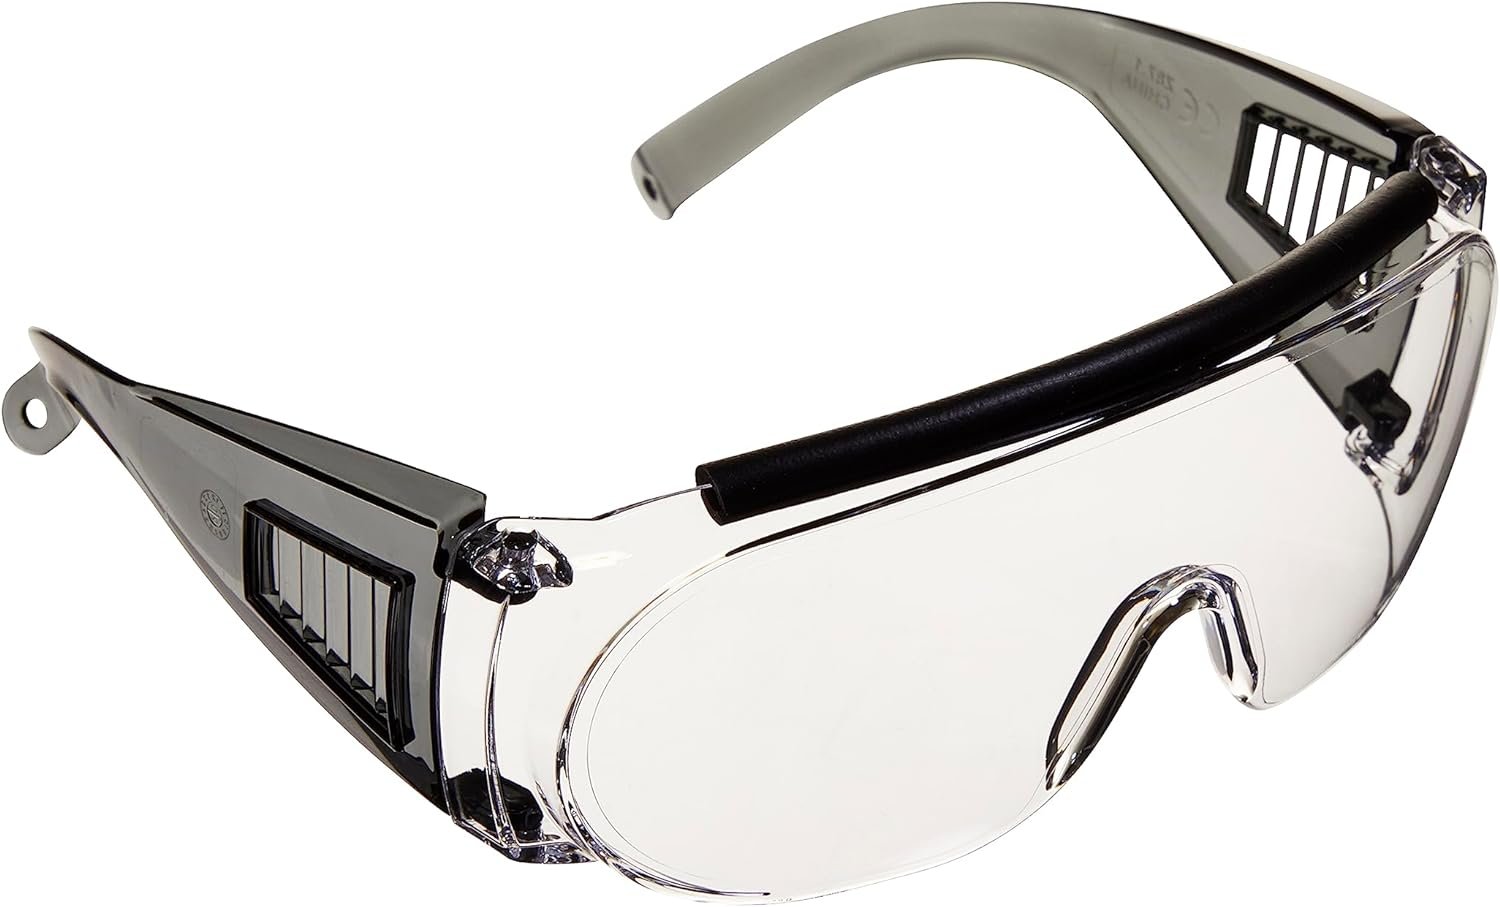 Allen Company Eye Protection Review